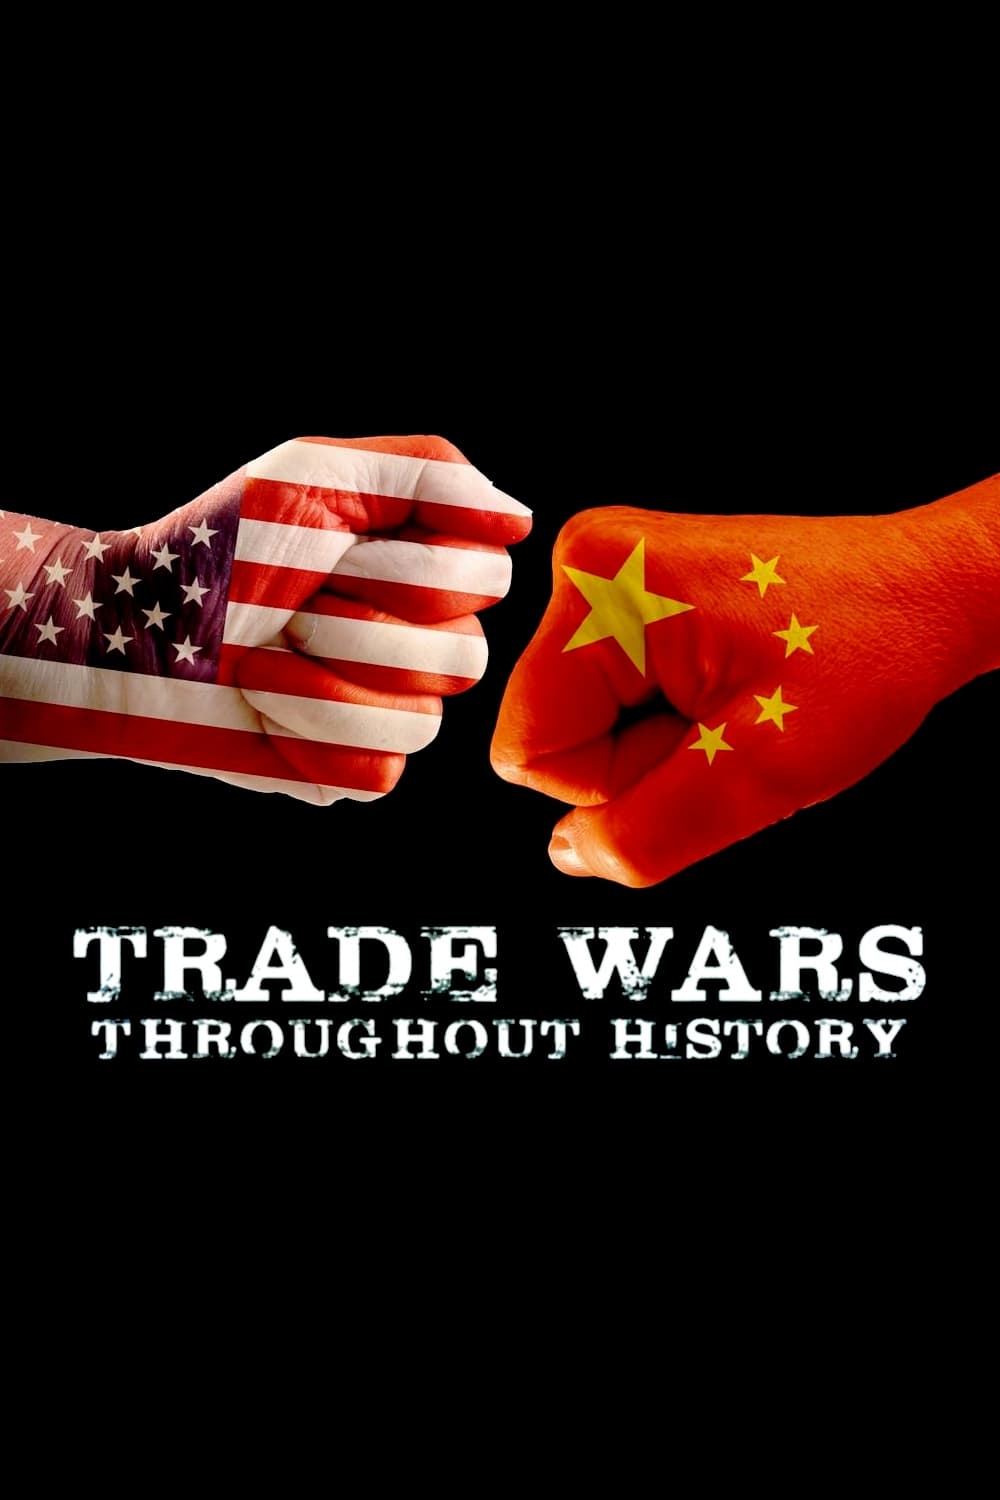 RETURN OF THE TRADE WARS